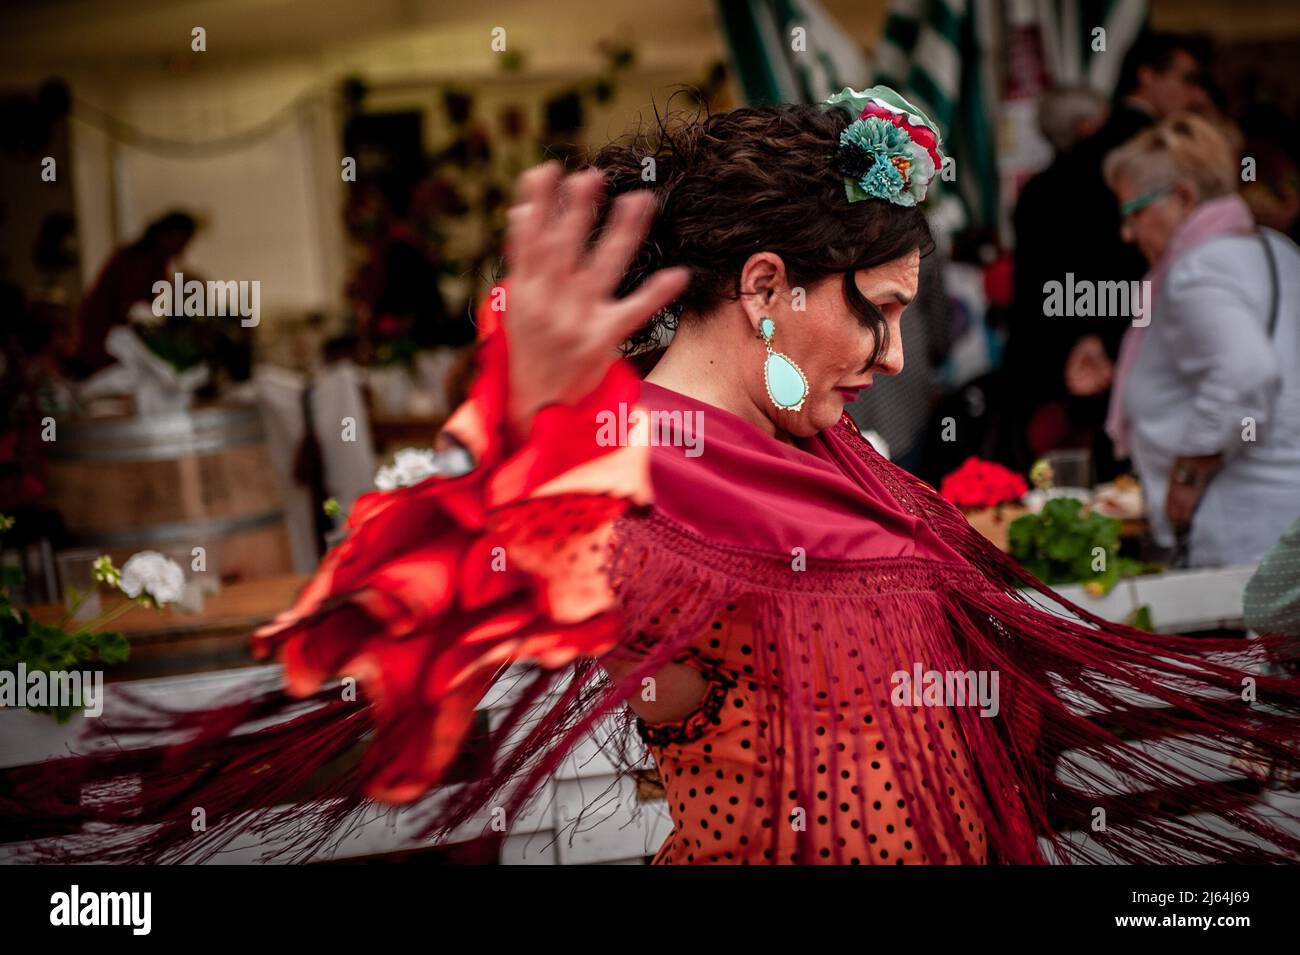 Barcelona, Spain. April 27, 2022, Barcelona, Spain: A woman wearing in traditional Andalusian dress dances Sevillanas during La Feria de Abril (April Fair) held in Barcelona's Forum Park. The Feria de Abril in Barcelona is a folkloric festival of Andalusian roots that has been celebrated in Catalonia for almost 50 years. Credit: Jordi Boixareu/Alamy Live News Credit:  Jordi Boixareu/Alamy Live News Stock Photo